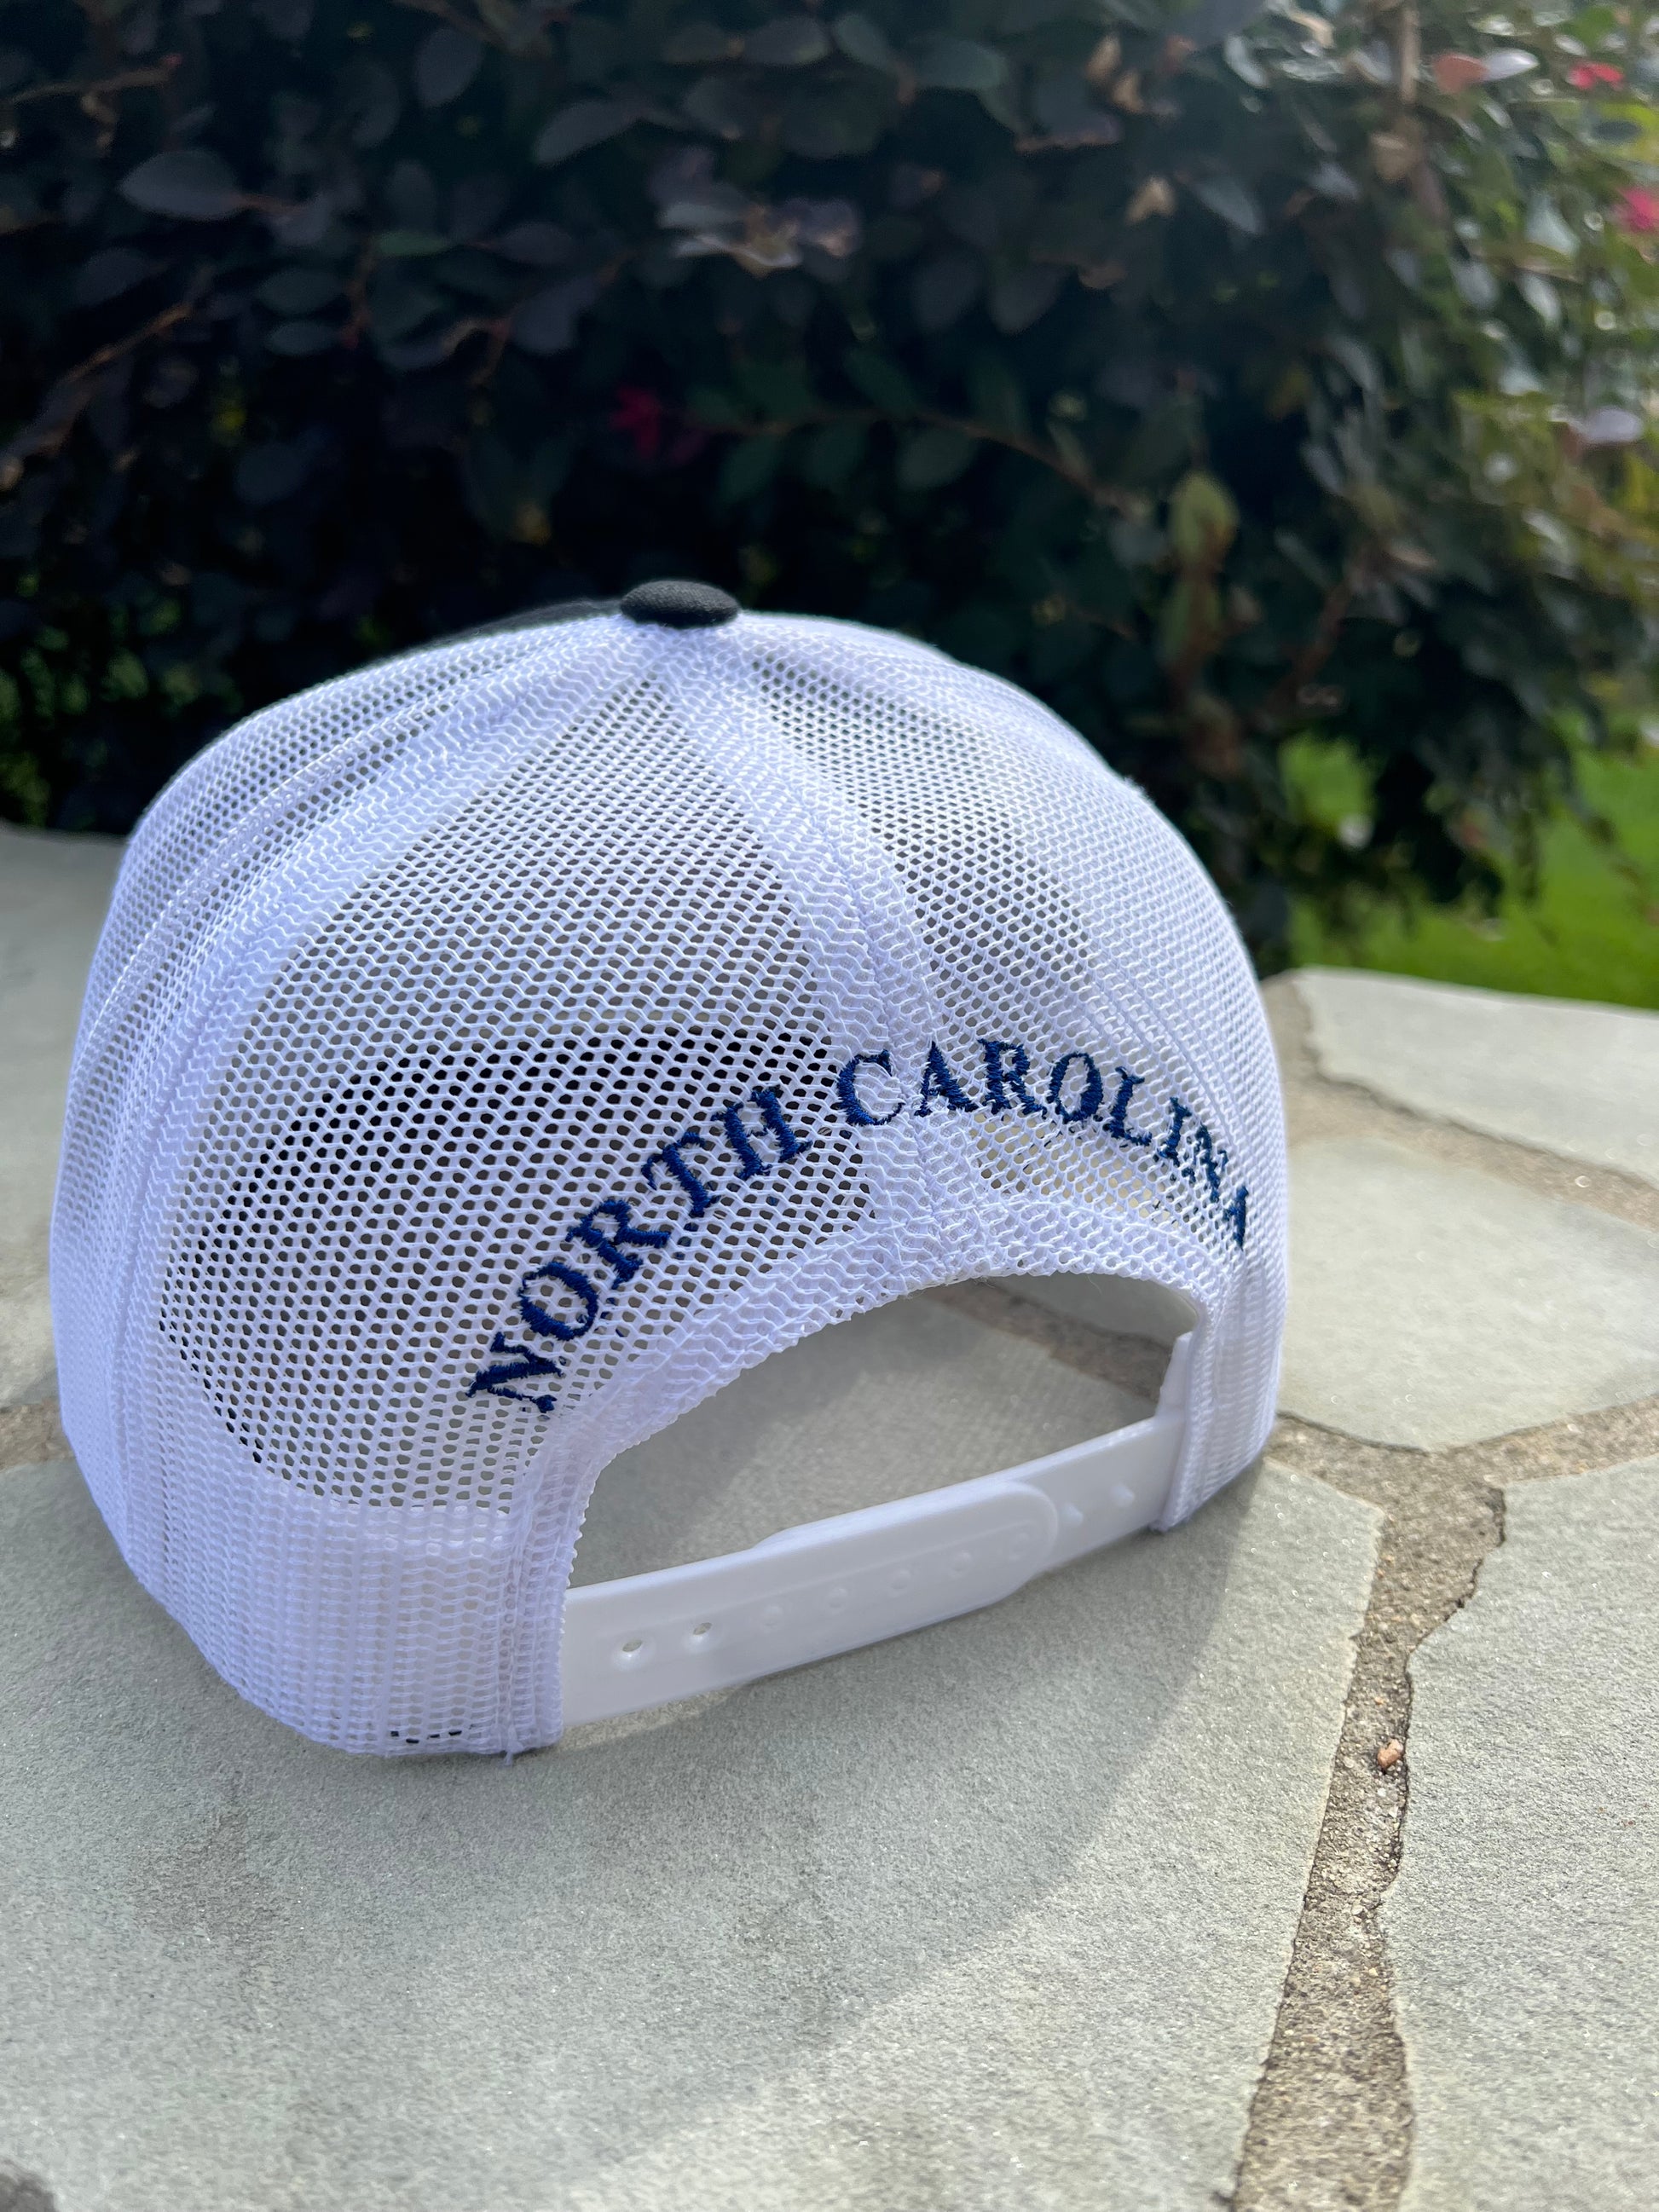 Back view of the hat. White mesh with the words North Carolina written on the back in blue lettering